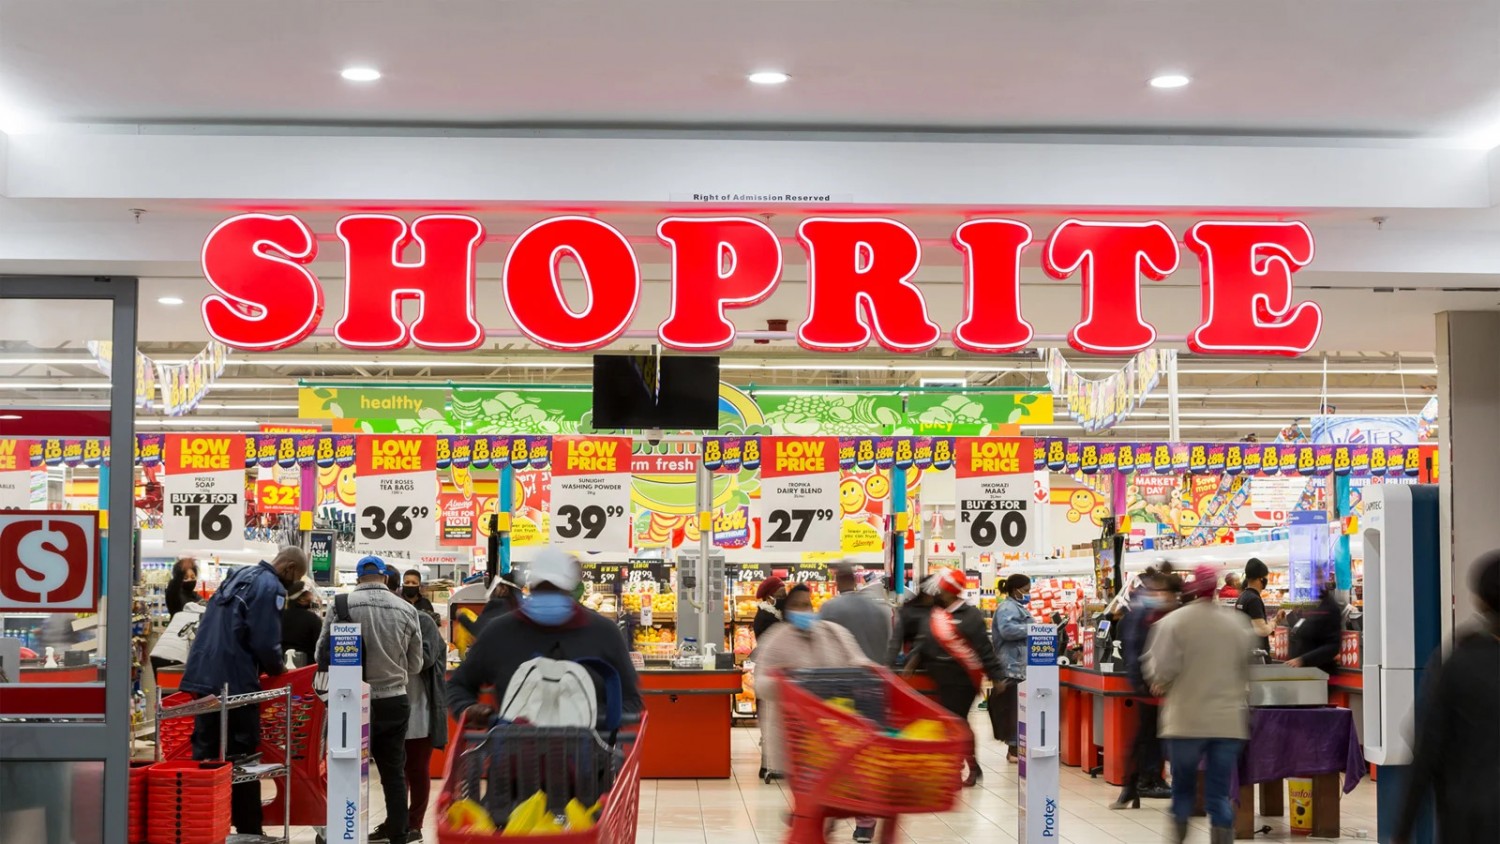 Shoprite Gets Green Light to Buy Some Massmart Stores